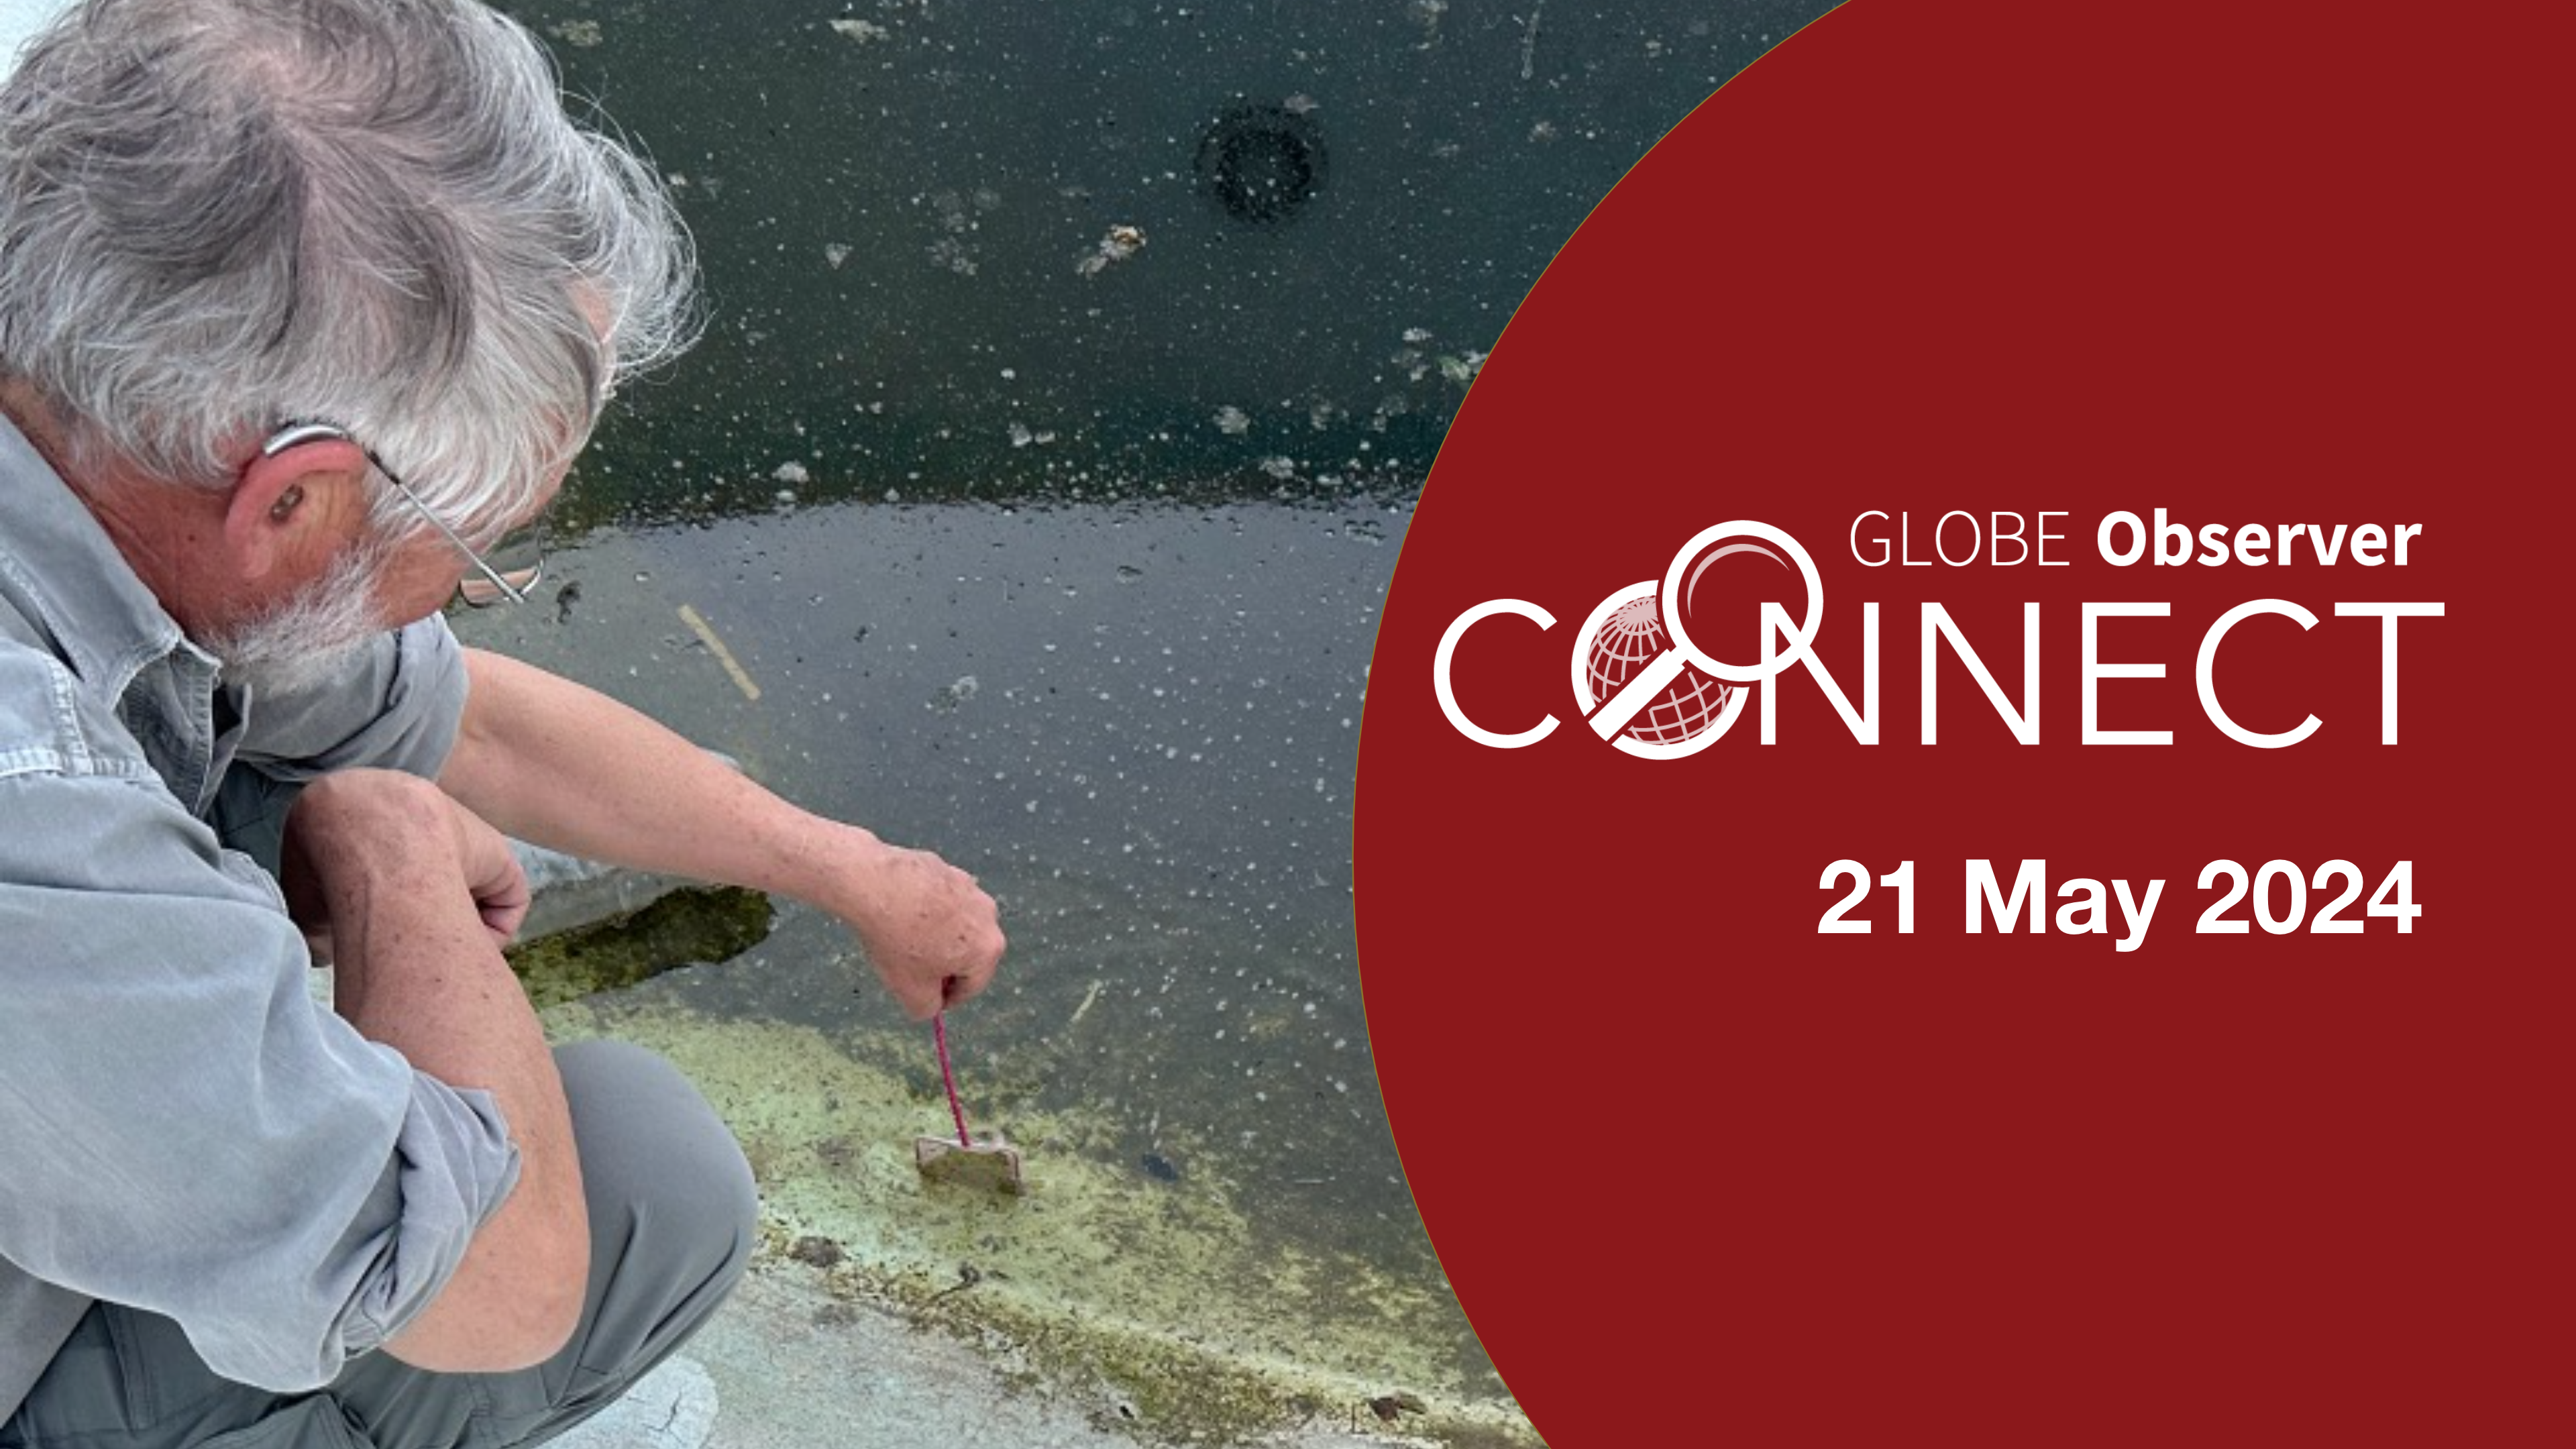 A man uses a small net to scoop mosquito larvae out of a dirty pool of standing water. On the right are the words: GLOBE Observer Connect, 21 May 2024.